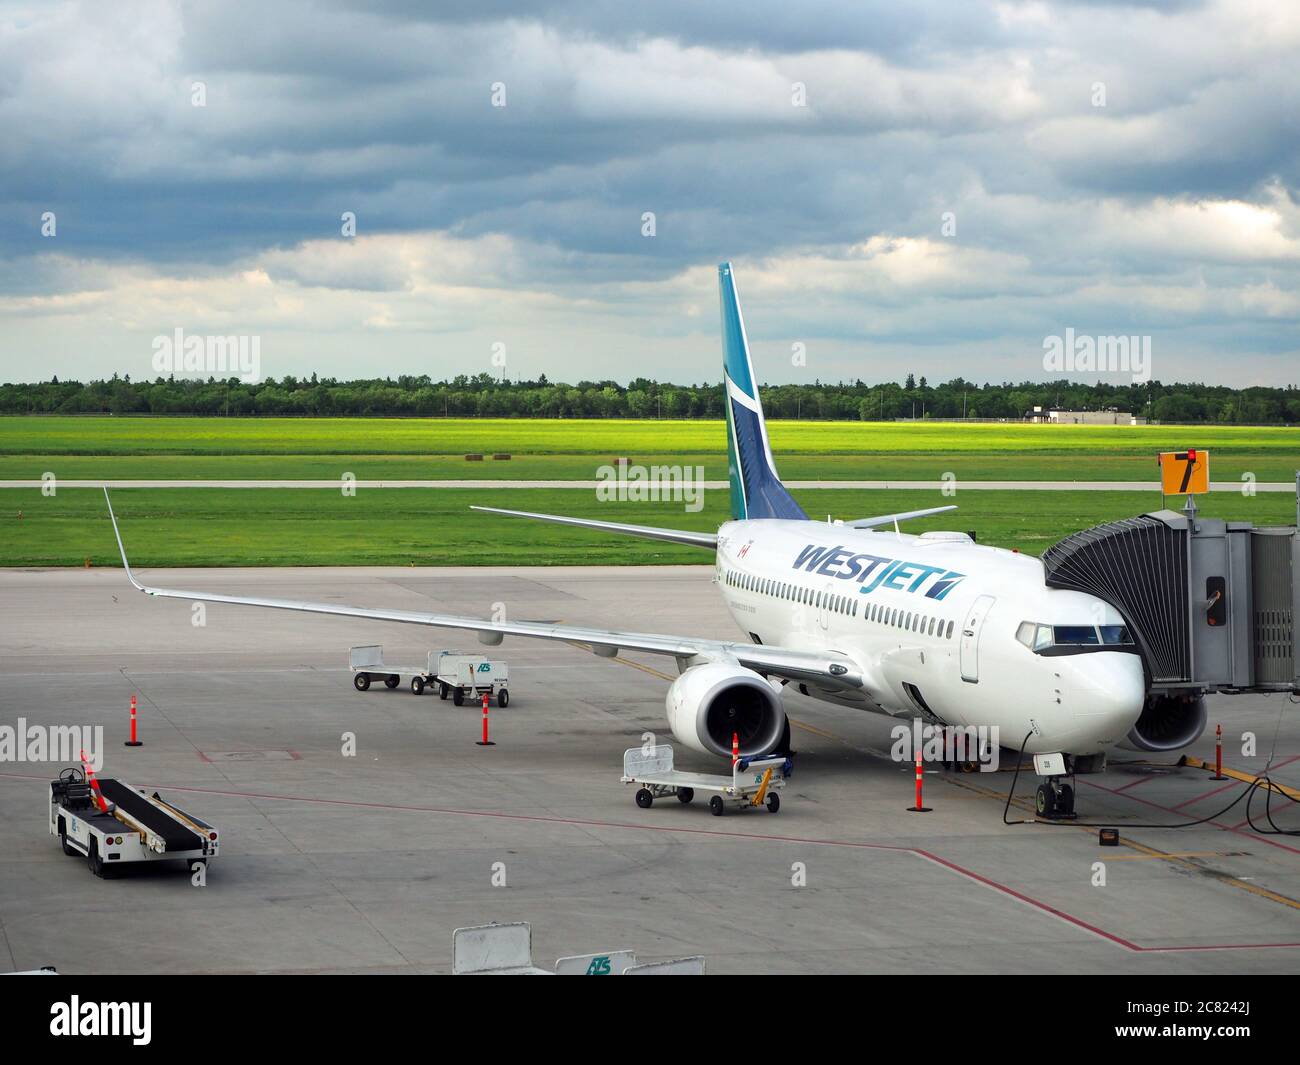 Westjet aircraft on stand, Canada. Stock Photo